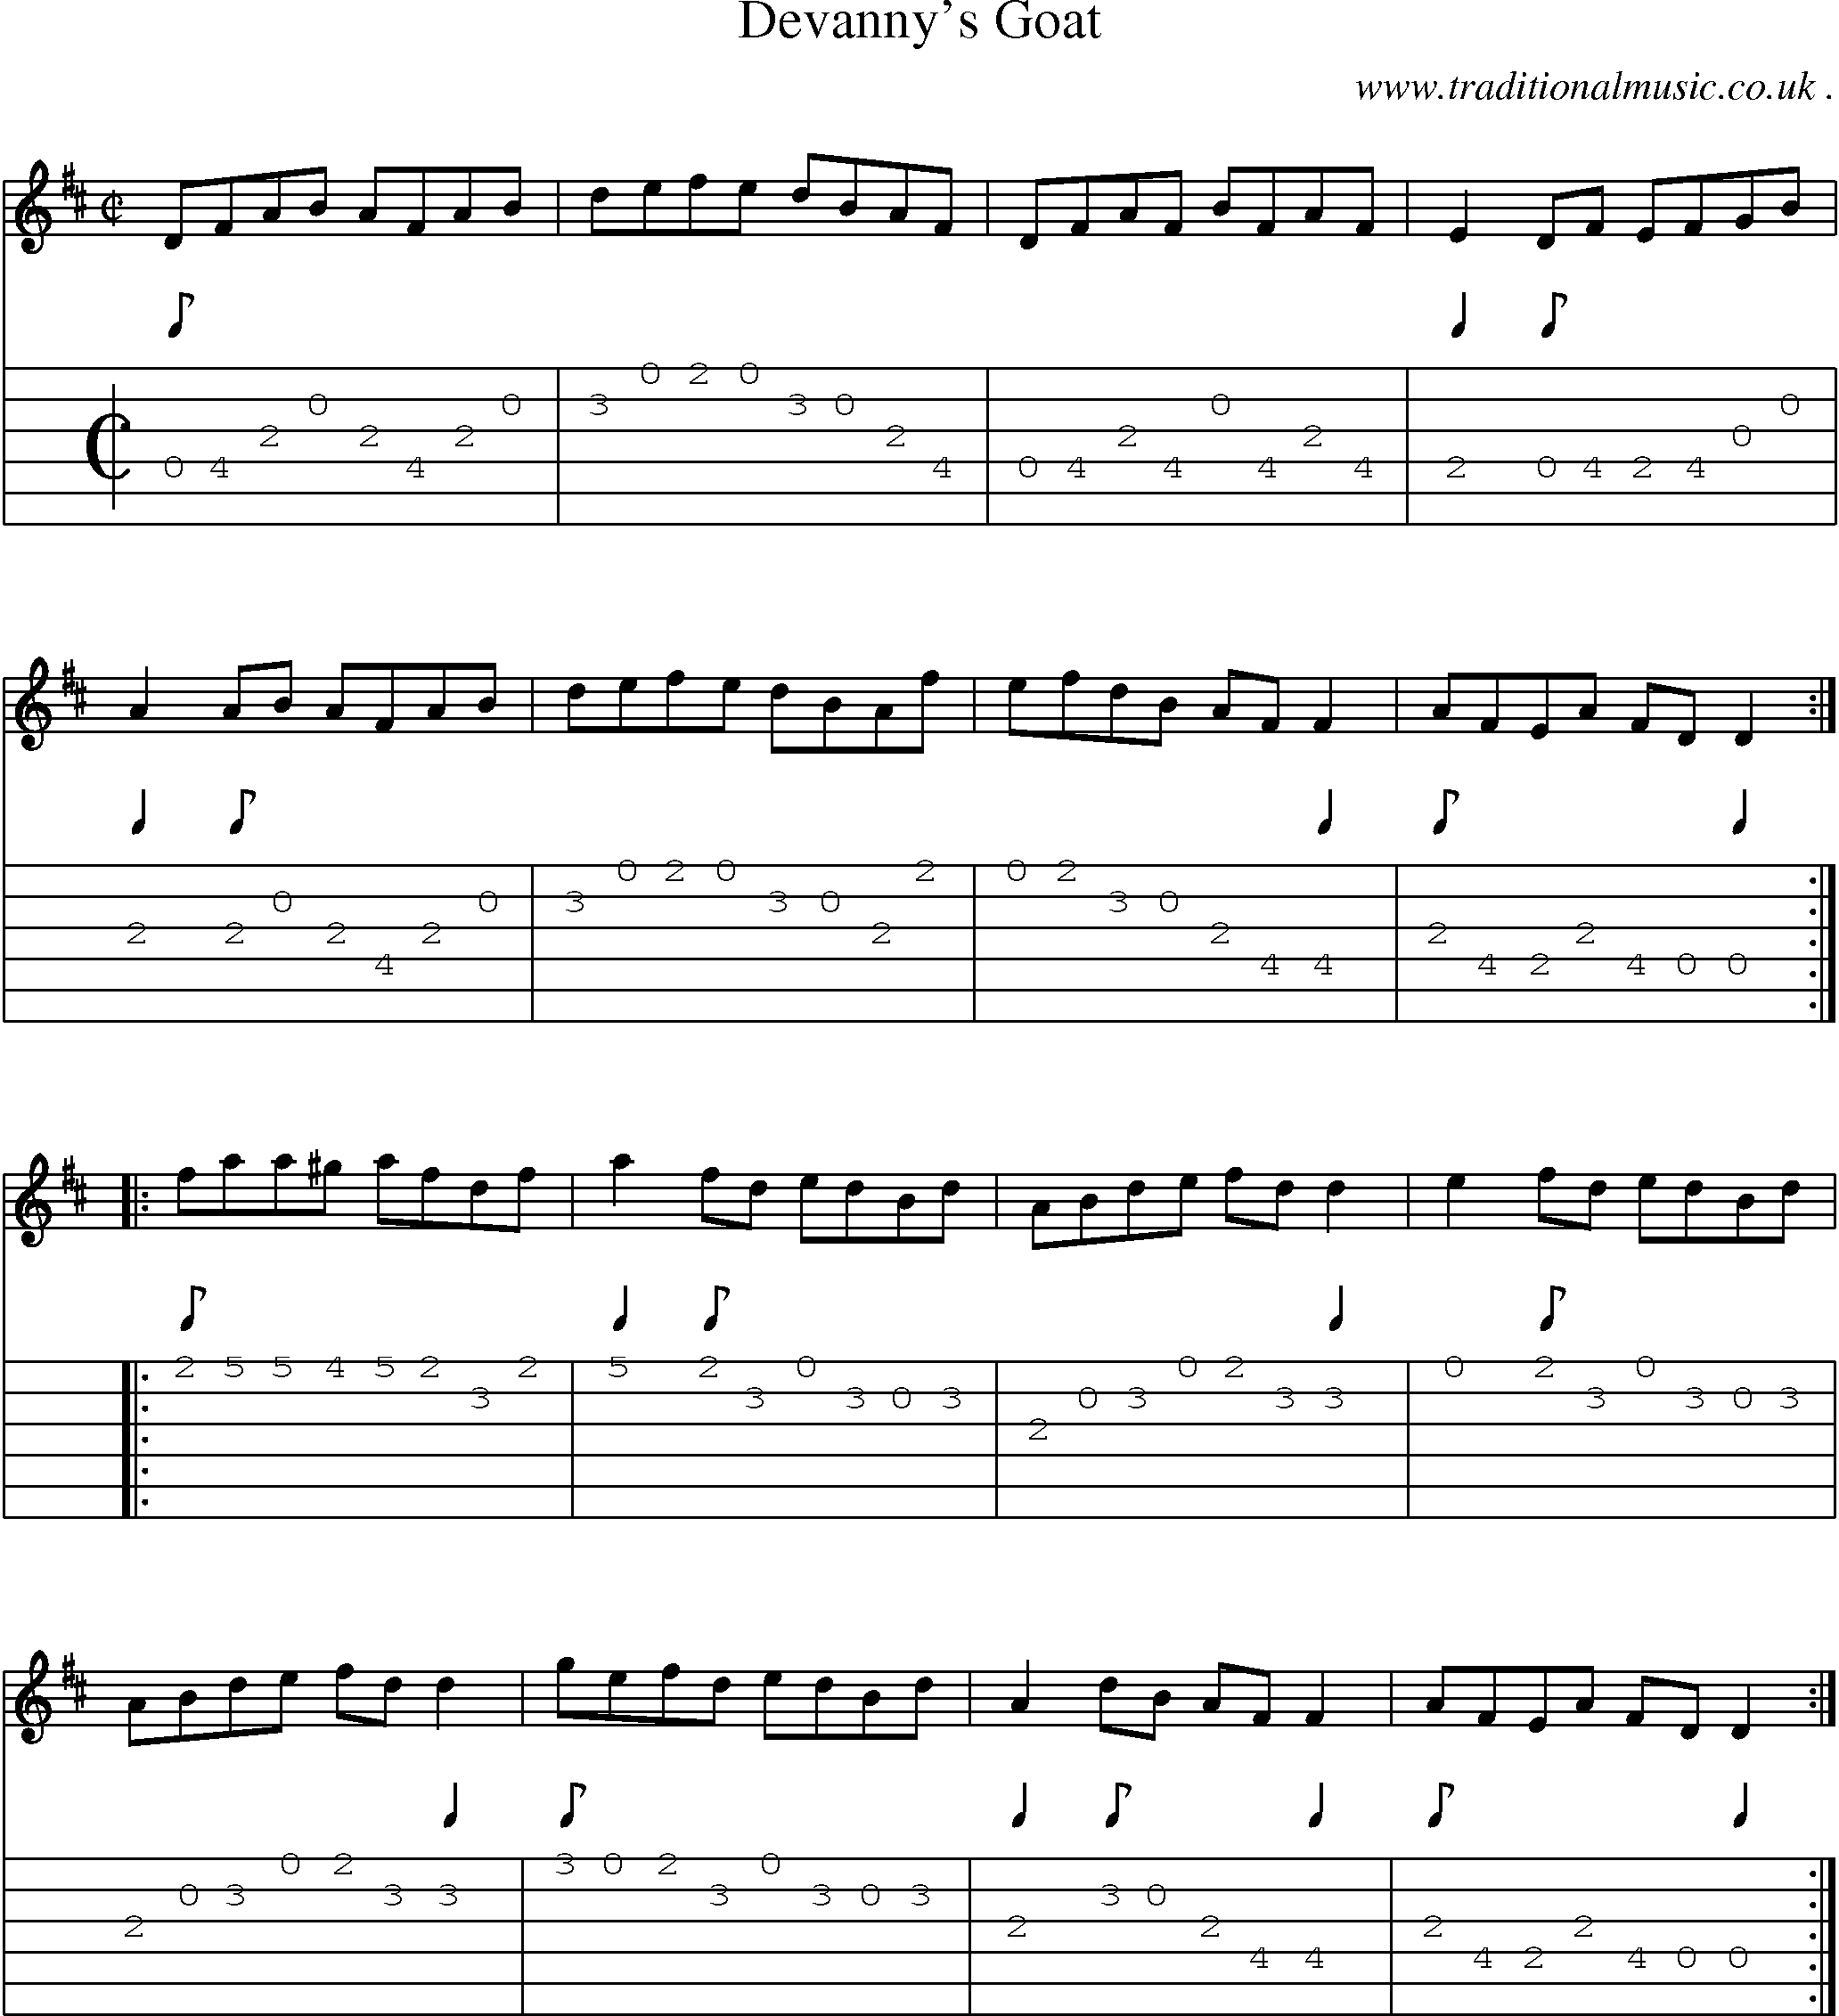 Sheet-Music and Guitar Tabs for Devannys Goat